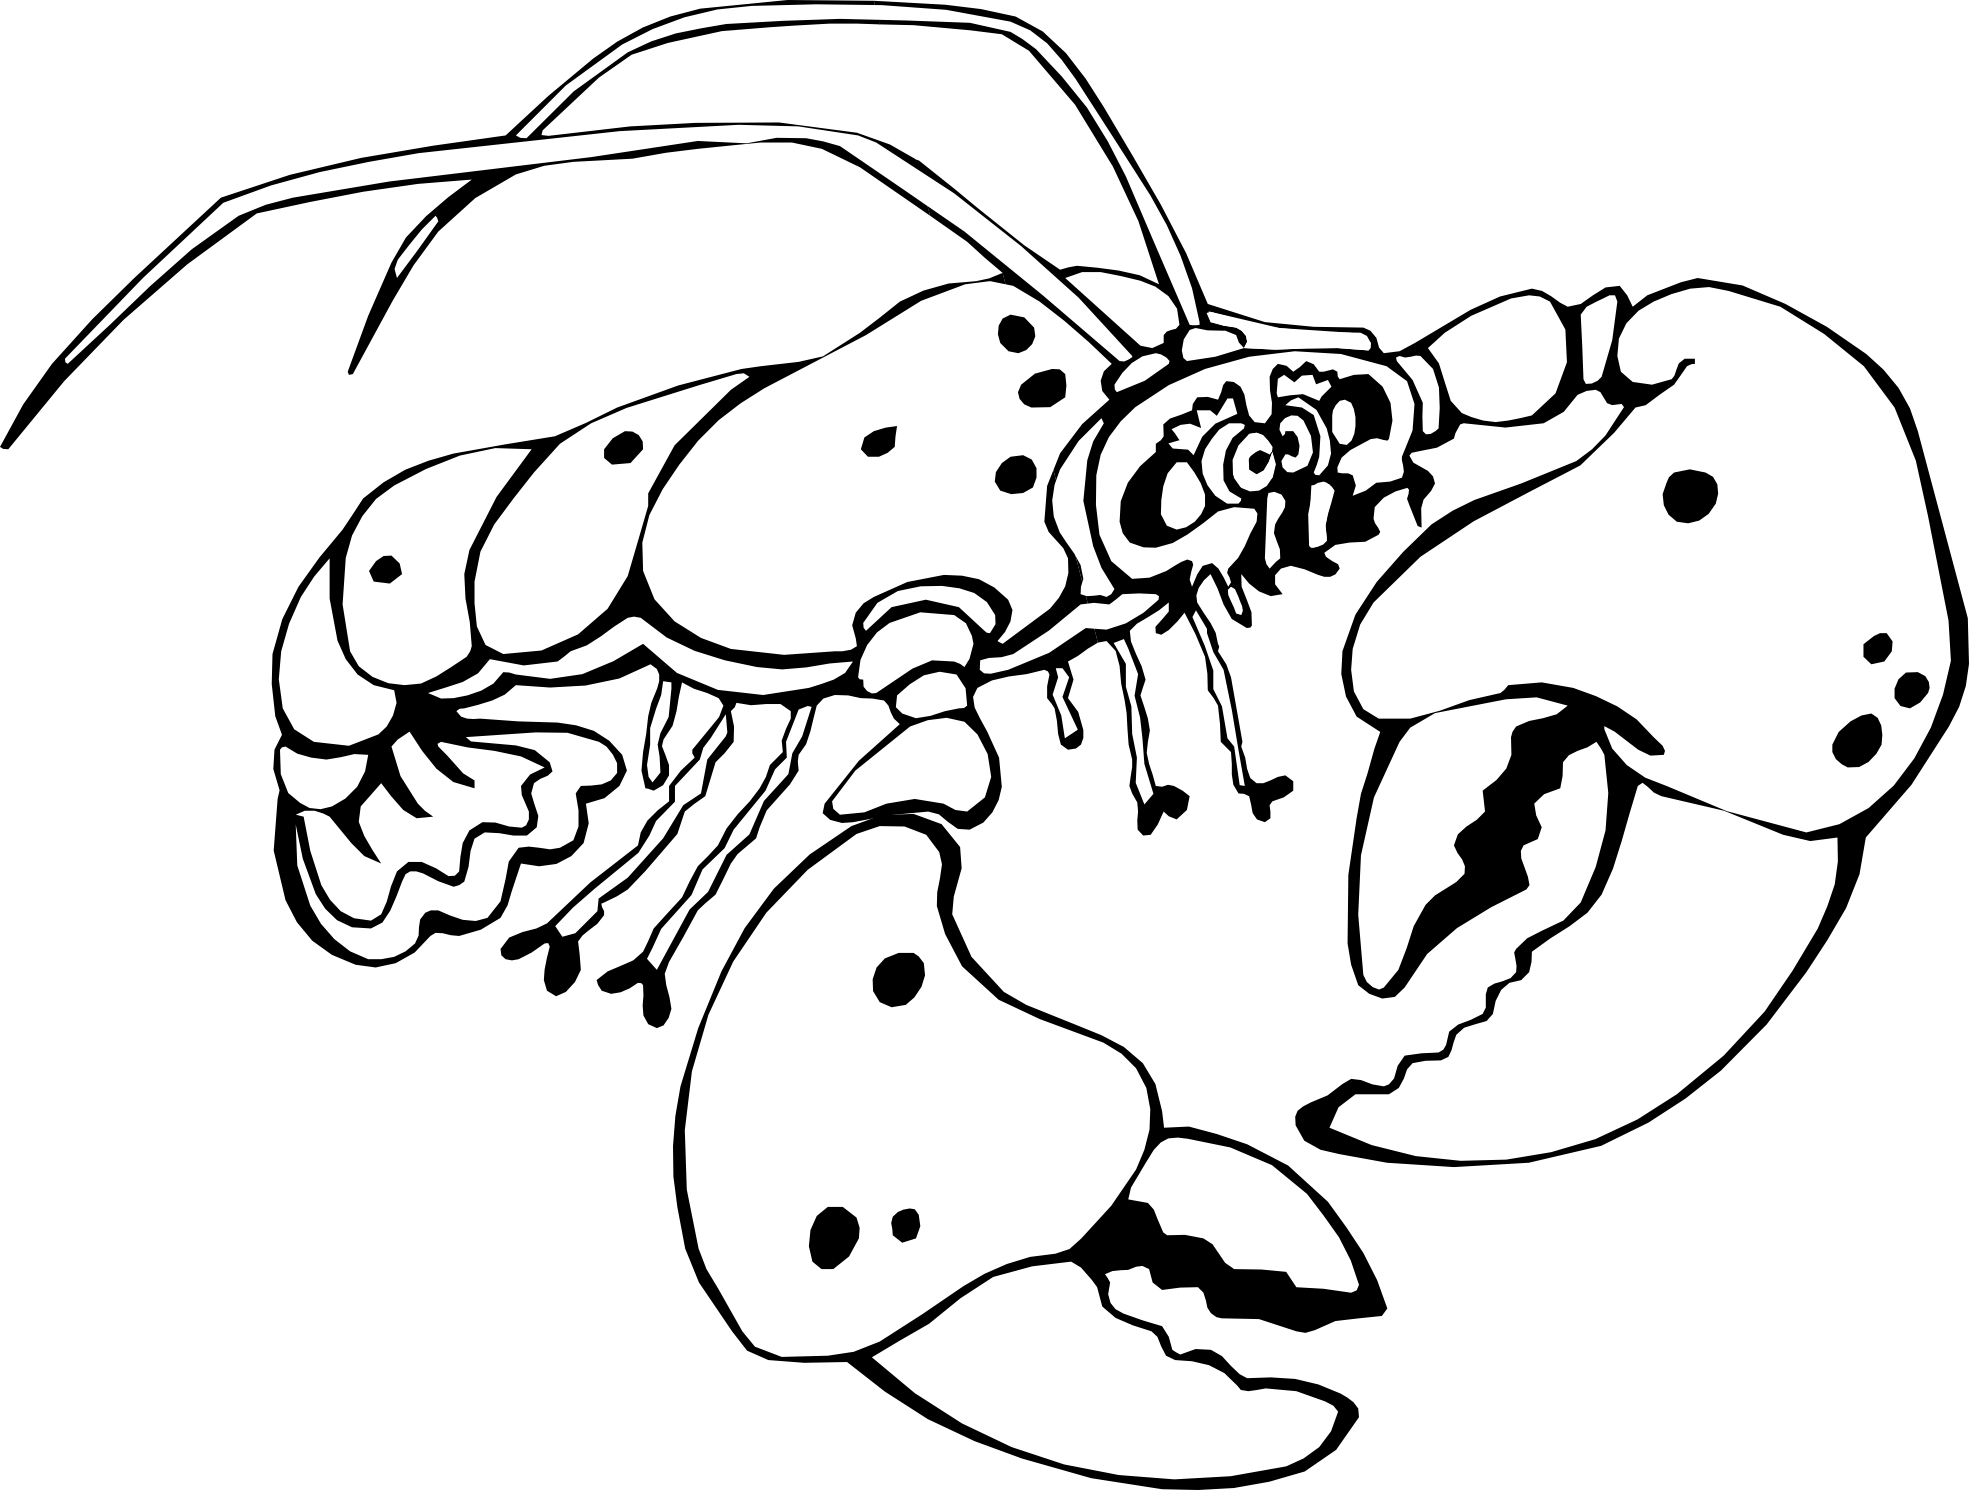 Lobster Of A Black And White Crayfish Clipart